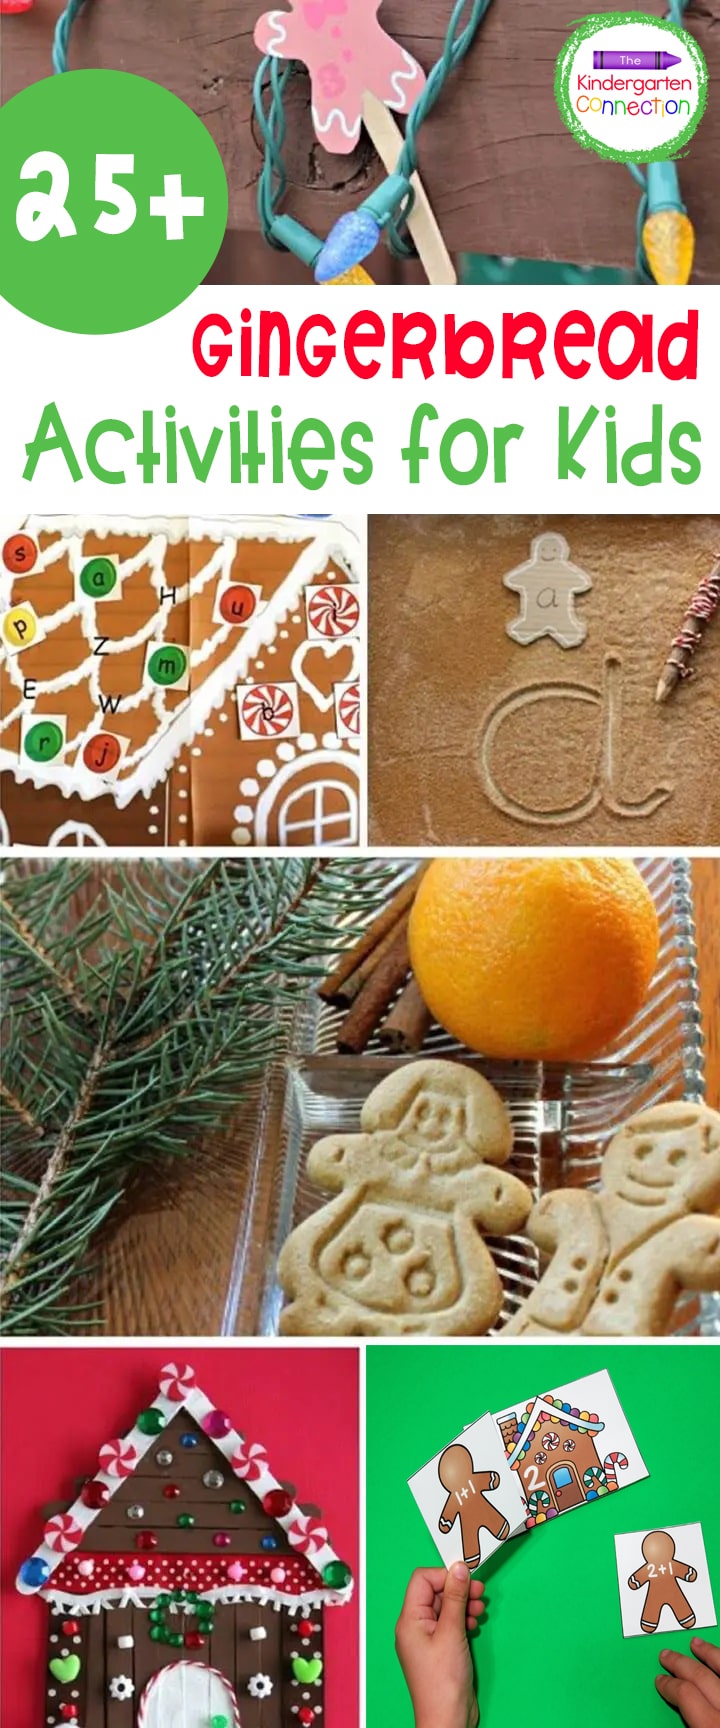 These 25+ gingerbread activities for kids are sure to be a hit in your classroom or home this holiday season!